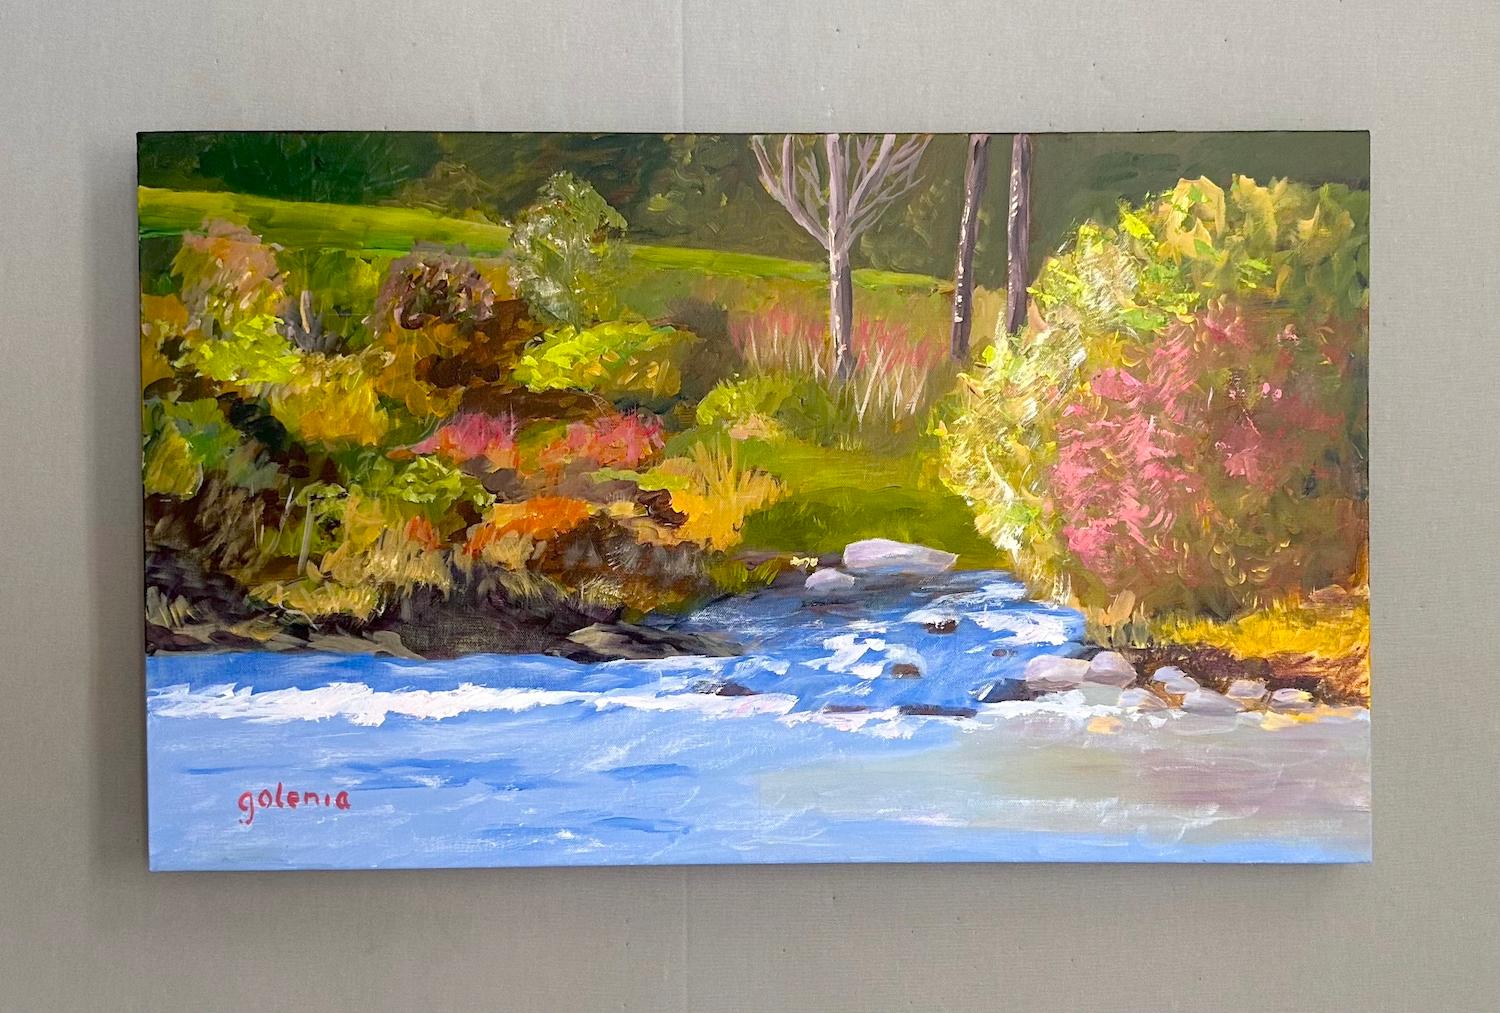 <p>Artist Comments<br>Grass, bushes, and trees form a picturesque setting for a rivulet that subtly joins a stream. Varied brushstrokes capture the nuances of their forms and textures, while warm colors evoke the gentle touch of sunlight. The scene